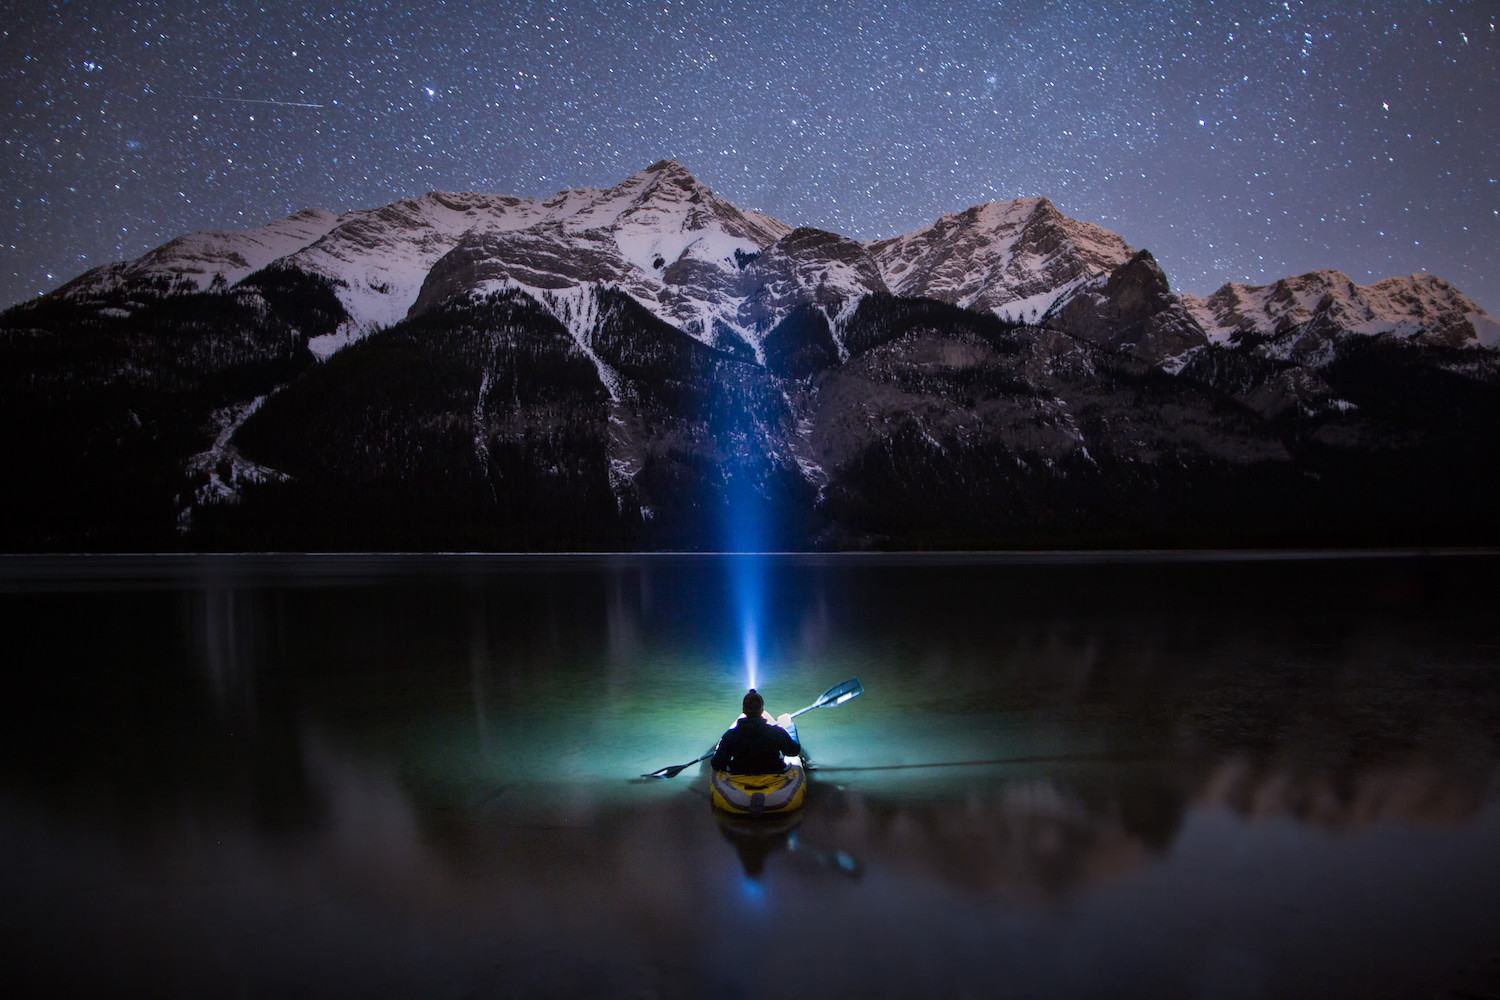 Reconnect with Nature Through the Breathtaking Self-Portraits of Paul Zizka